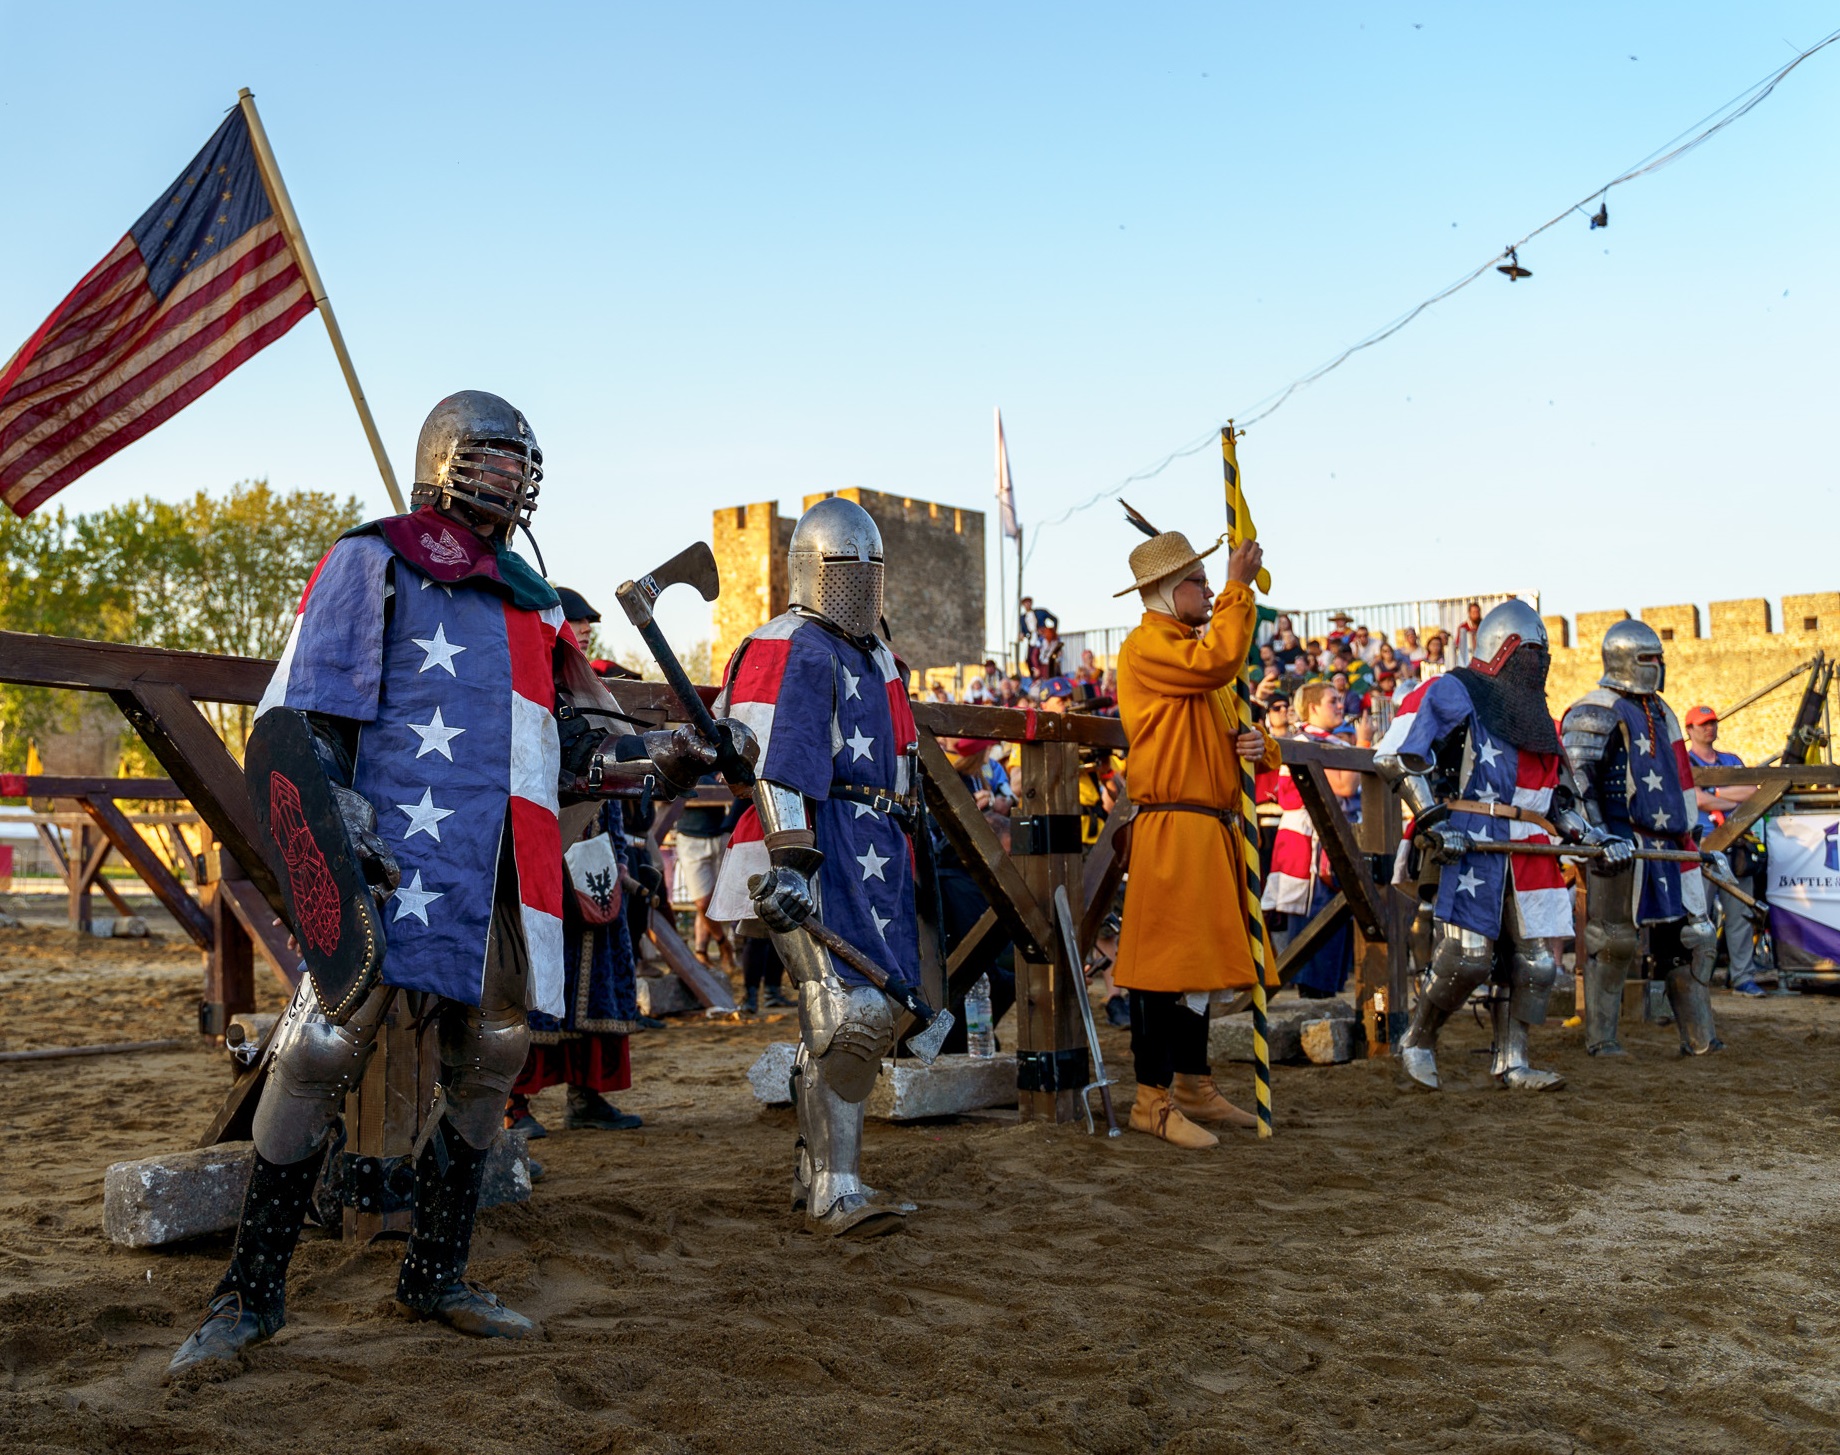 What's buhurt? Medieval combat sport with armor, swords, axes